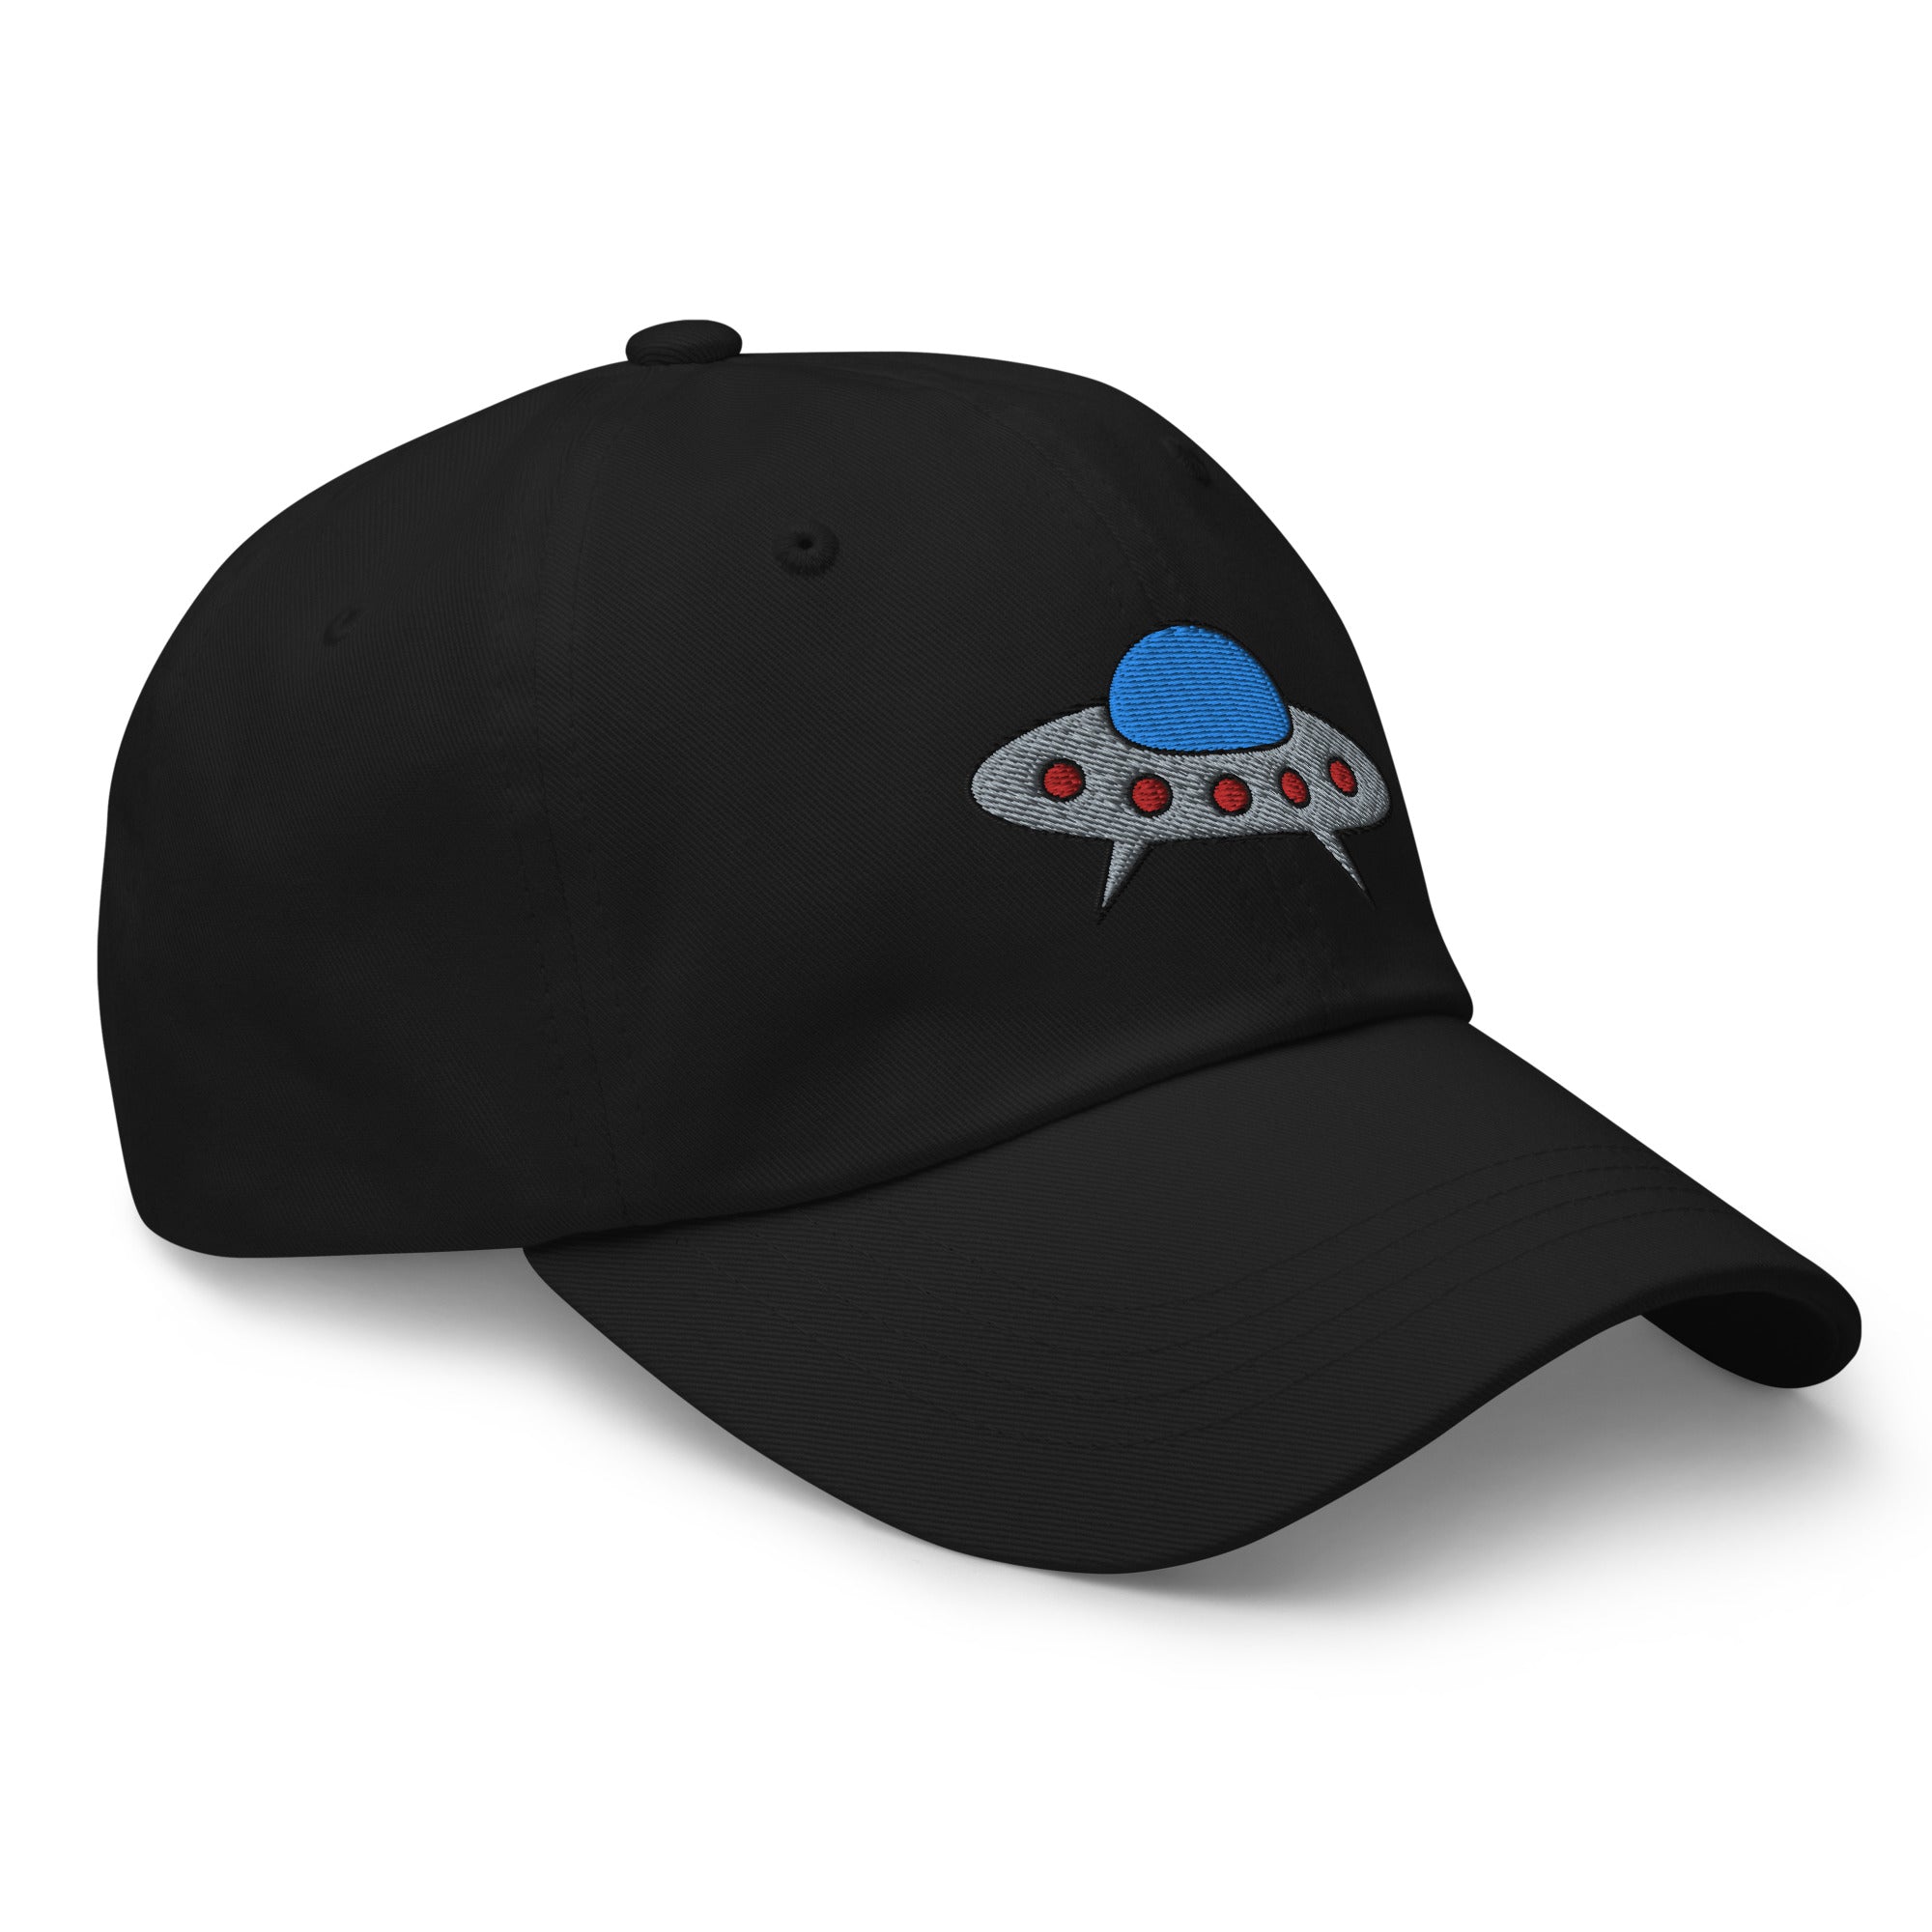 Space Alien Ship UFO Flying Saucer Embroidered Baseball Cap Dad hat - Edge of Life Designs